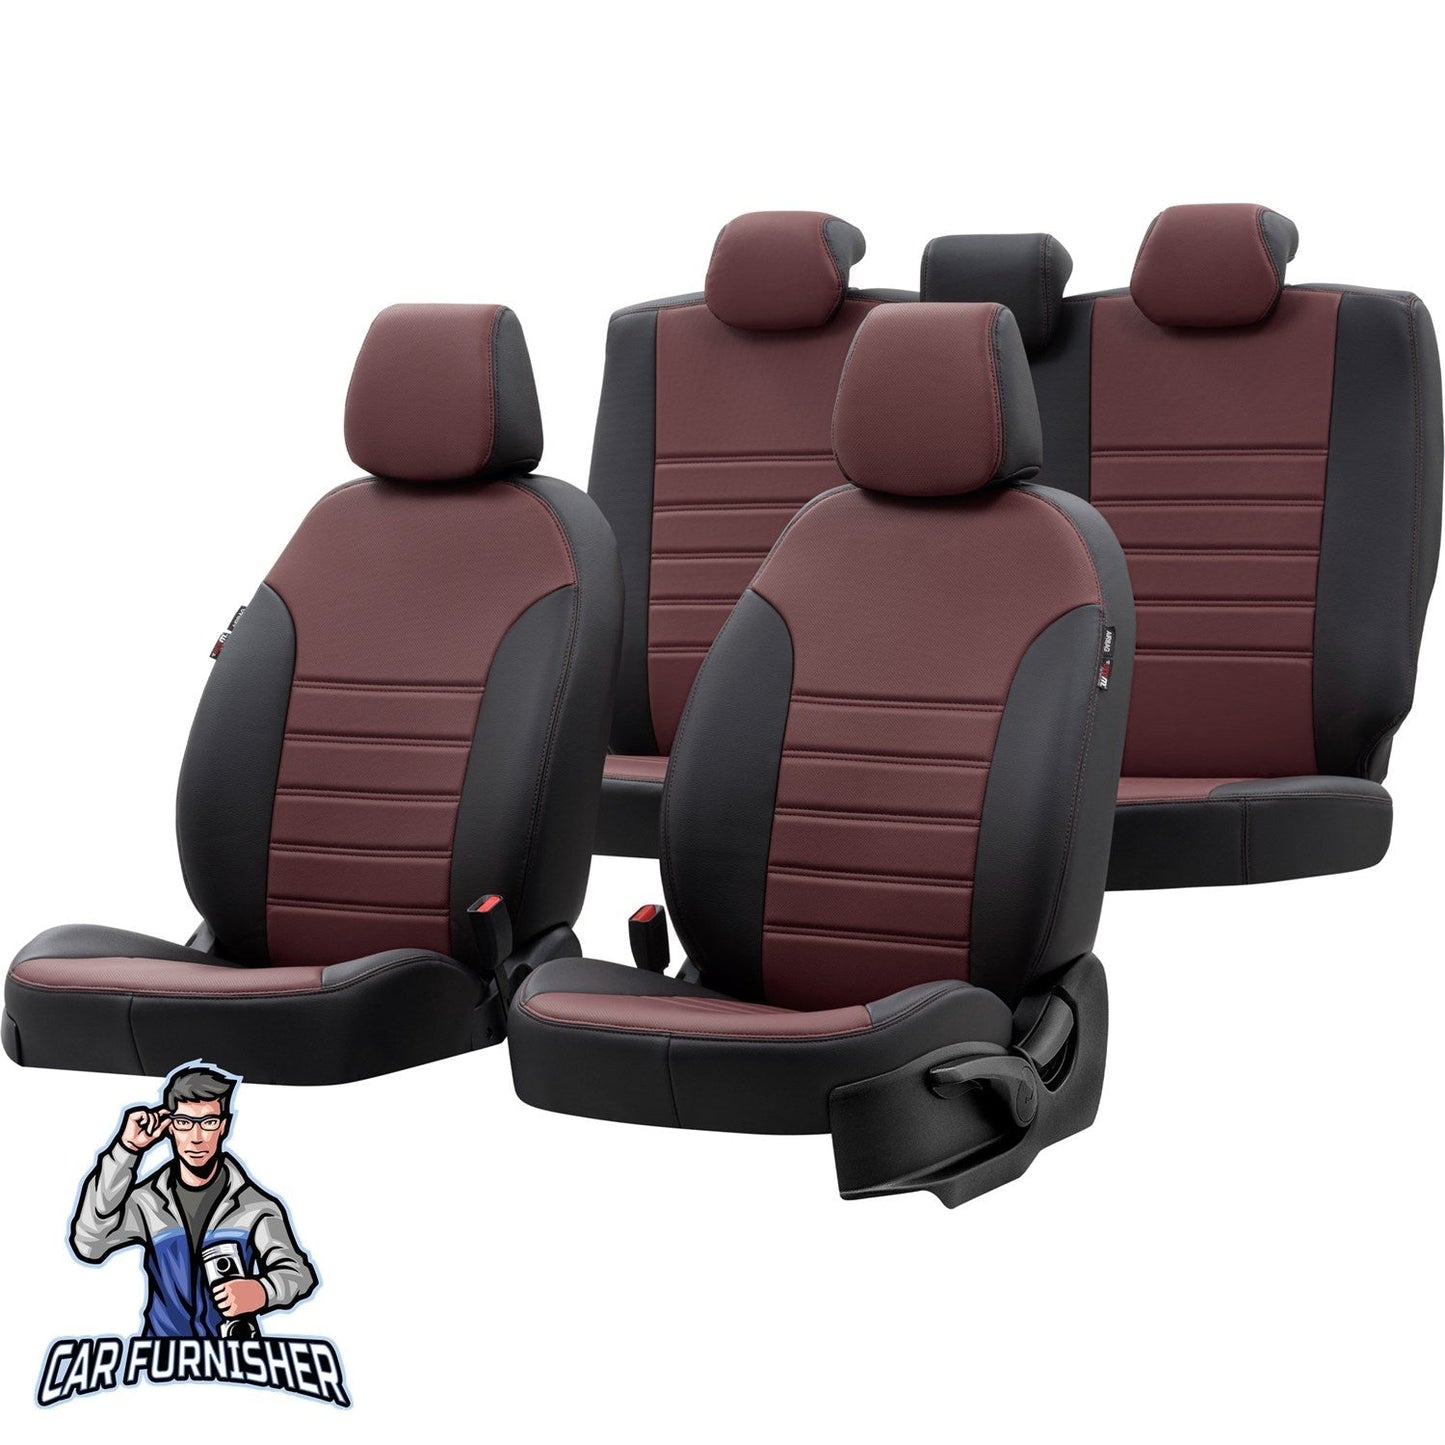 Renault Master Seat Covers Istanbul Leather Design Burgundy Leather